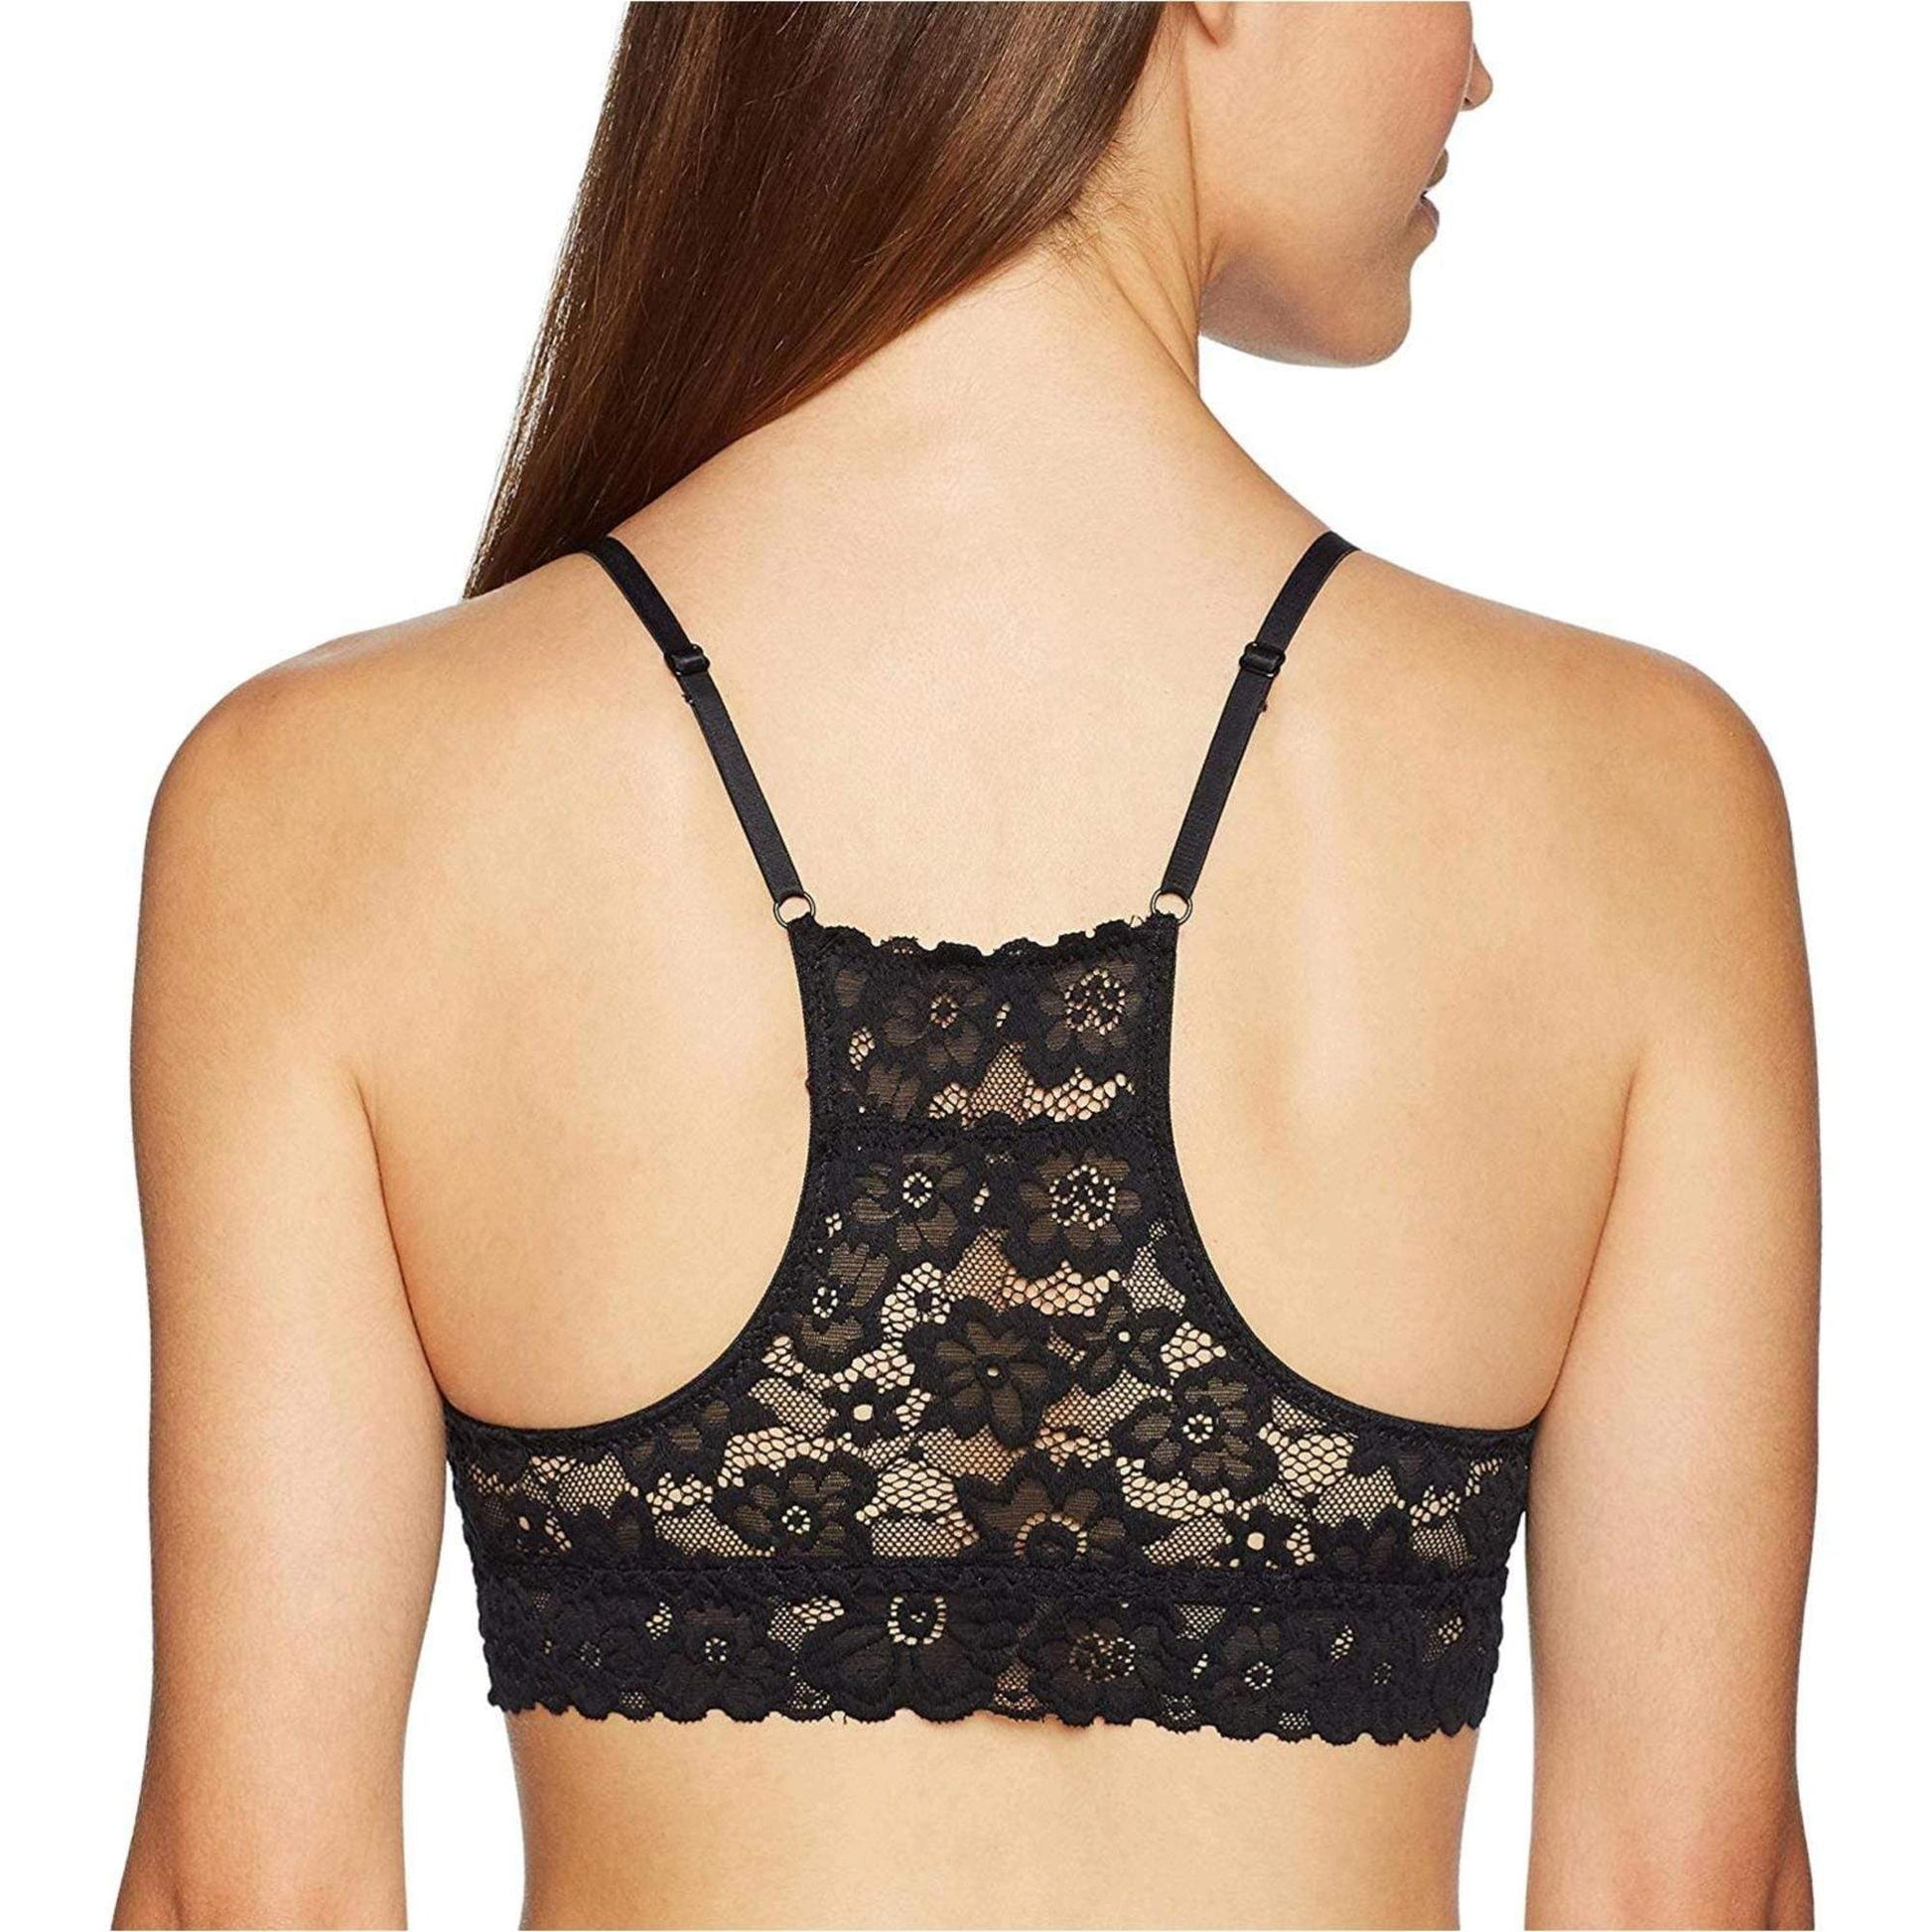 MAE womens underwear Large / Black Lace Racerback Bralette with Removable Pads